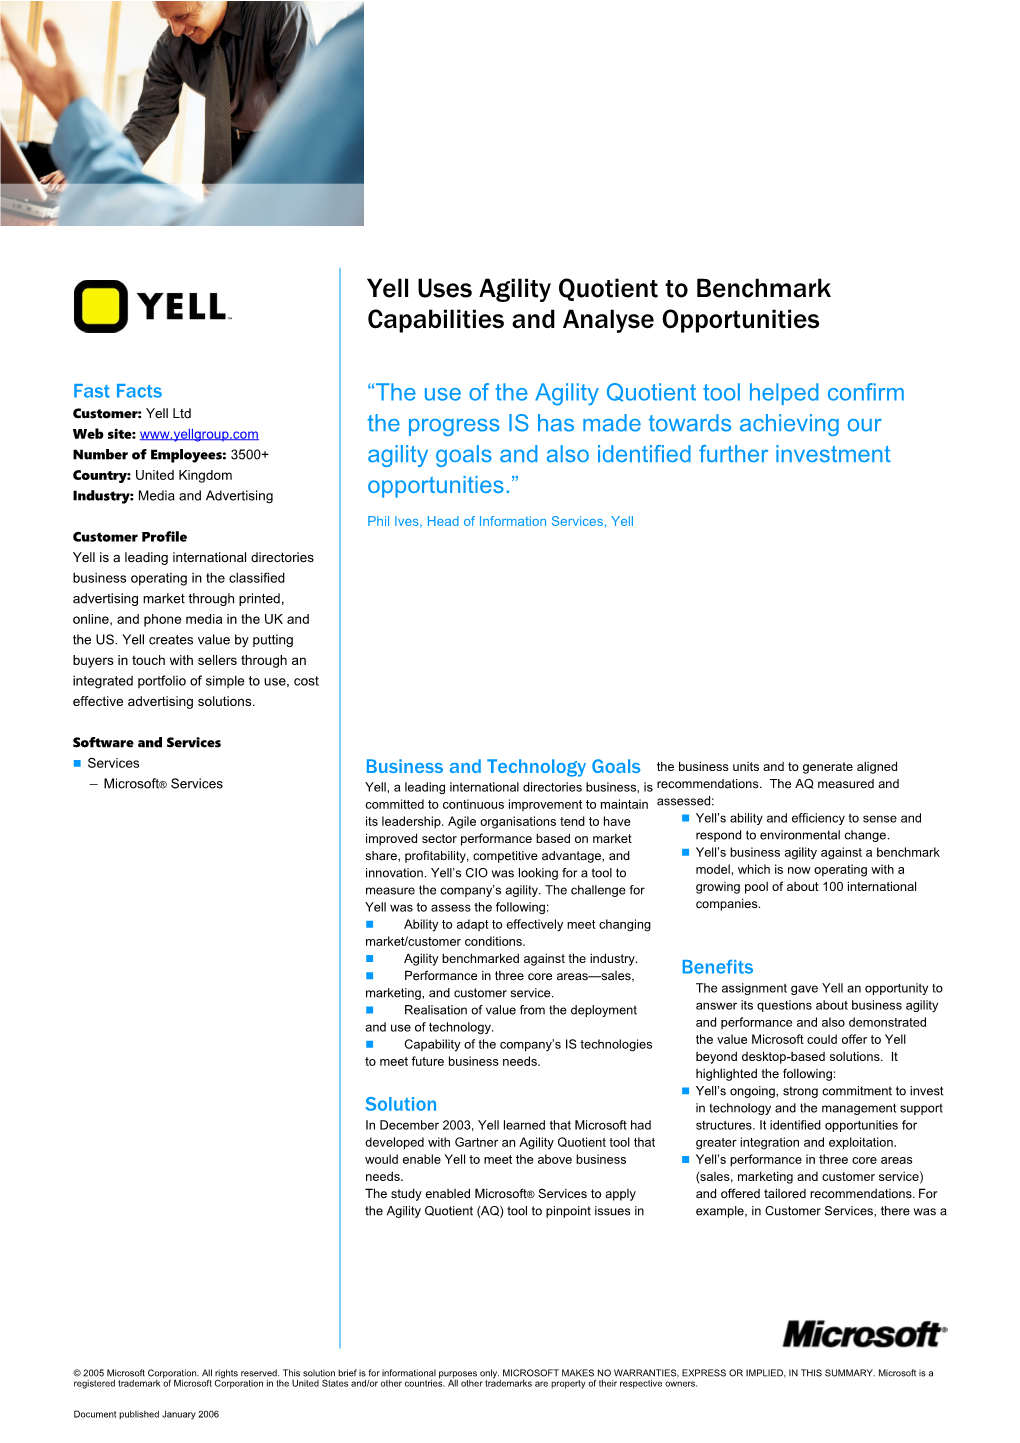 Yell Uses Agility Quotient to Benchmark Capabilities and Analyse Opportunities